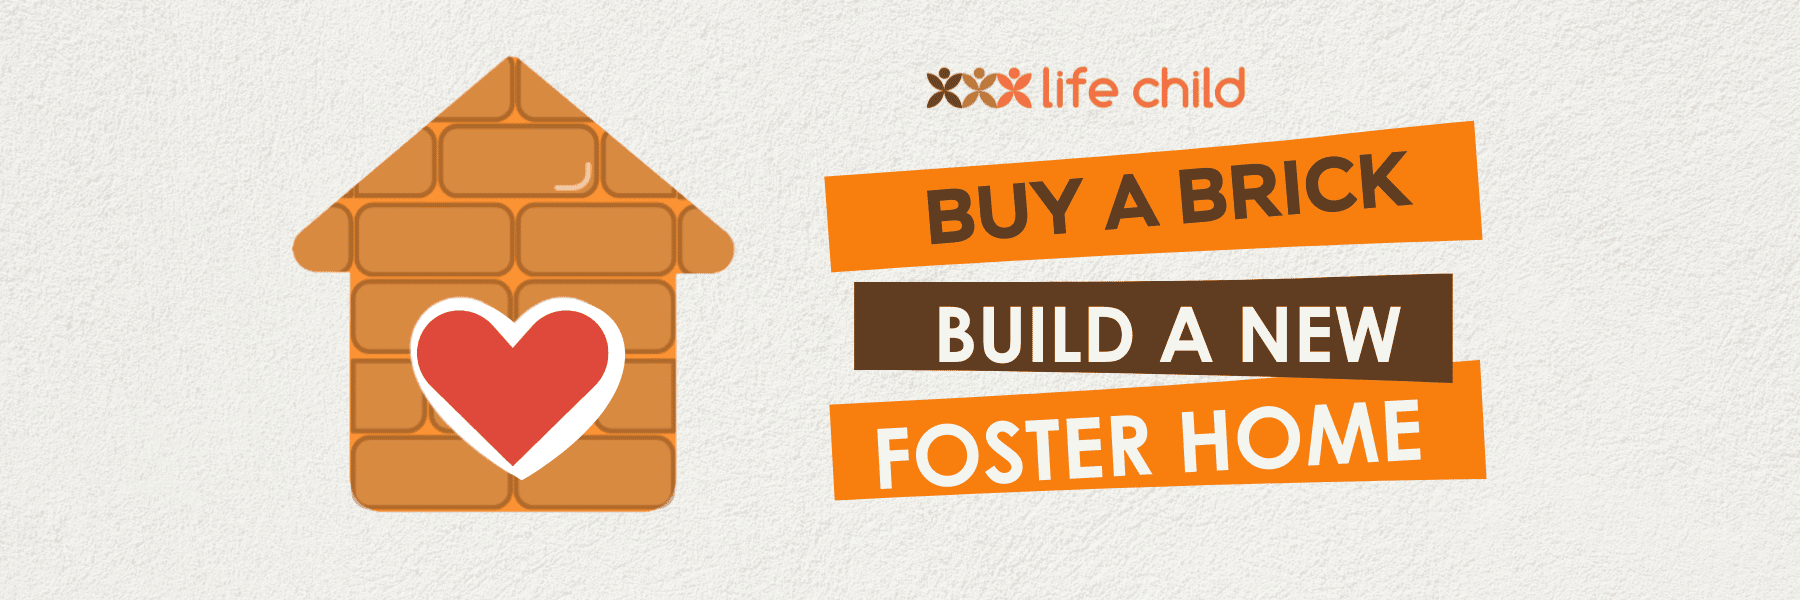 Buy a brick build a new foster house